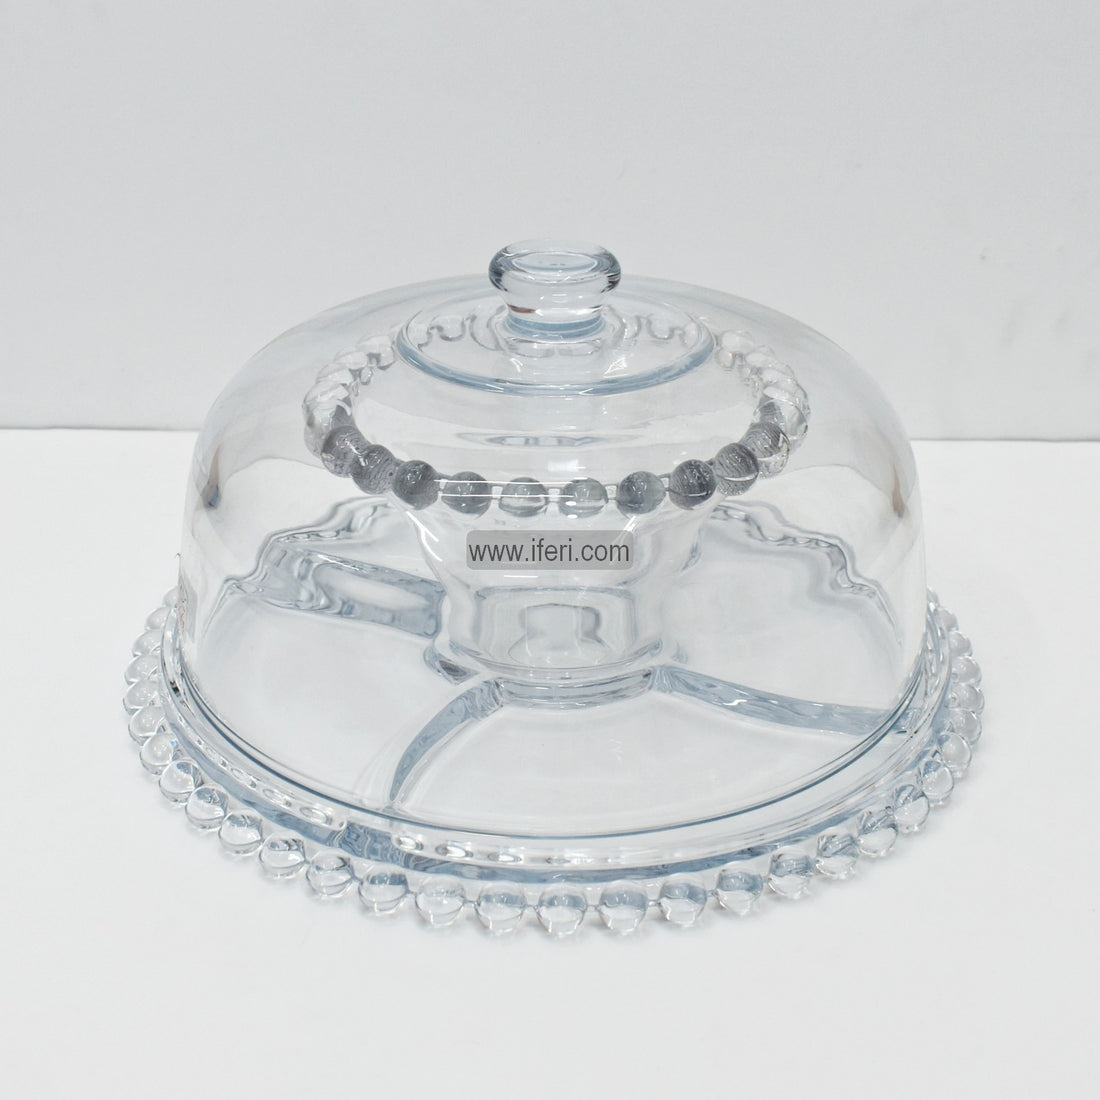 4 in 1 Multifunctional Glass Cake Stand Serving Platter Cake Plate with Dome Cover TB8561